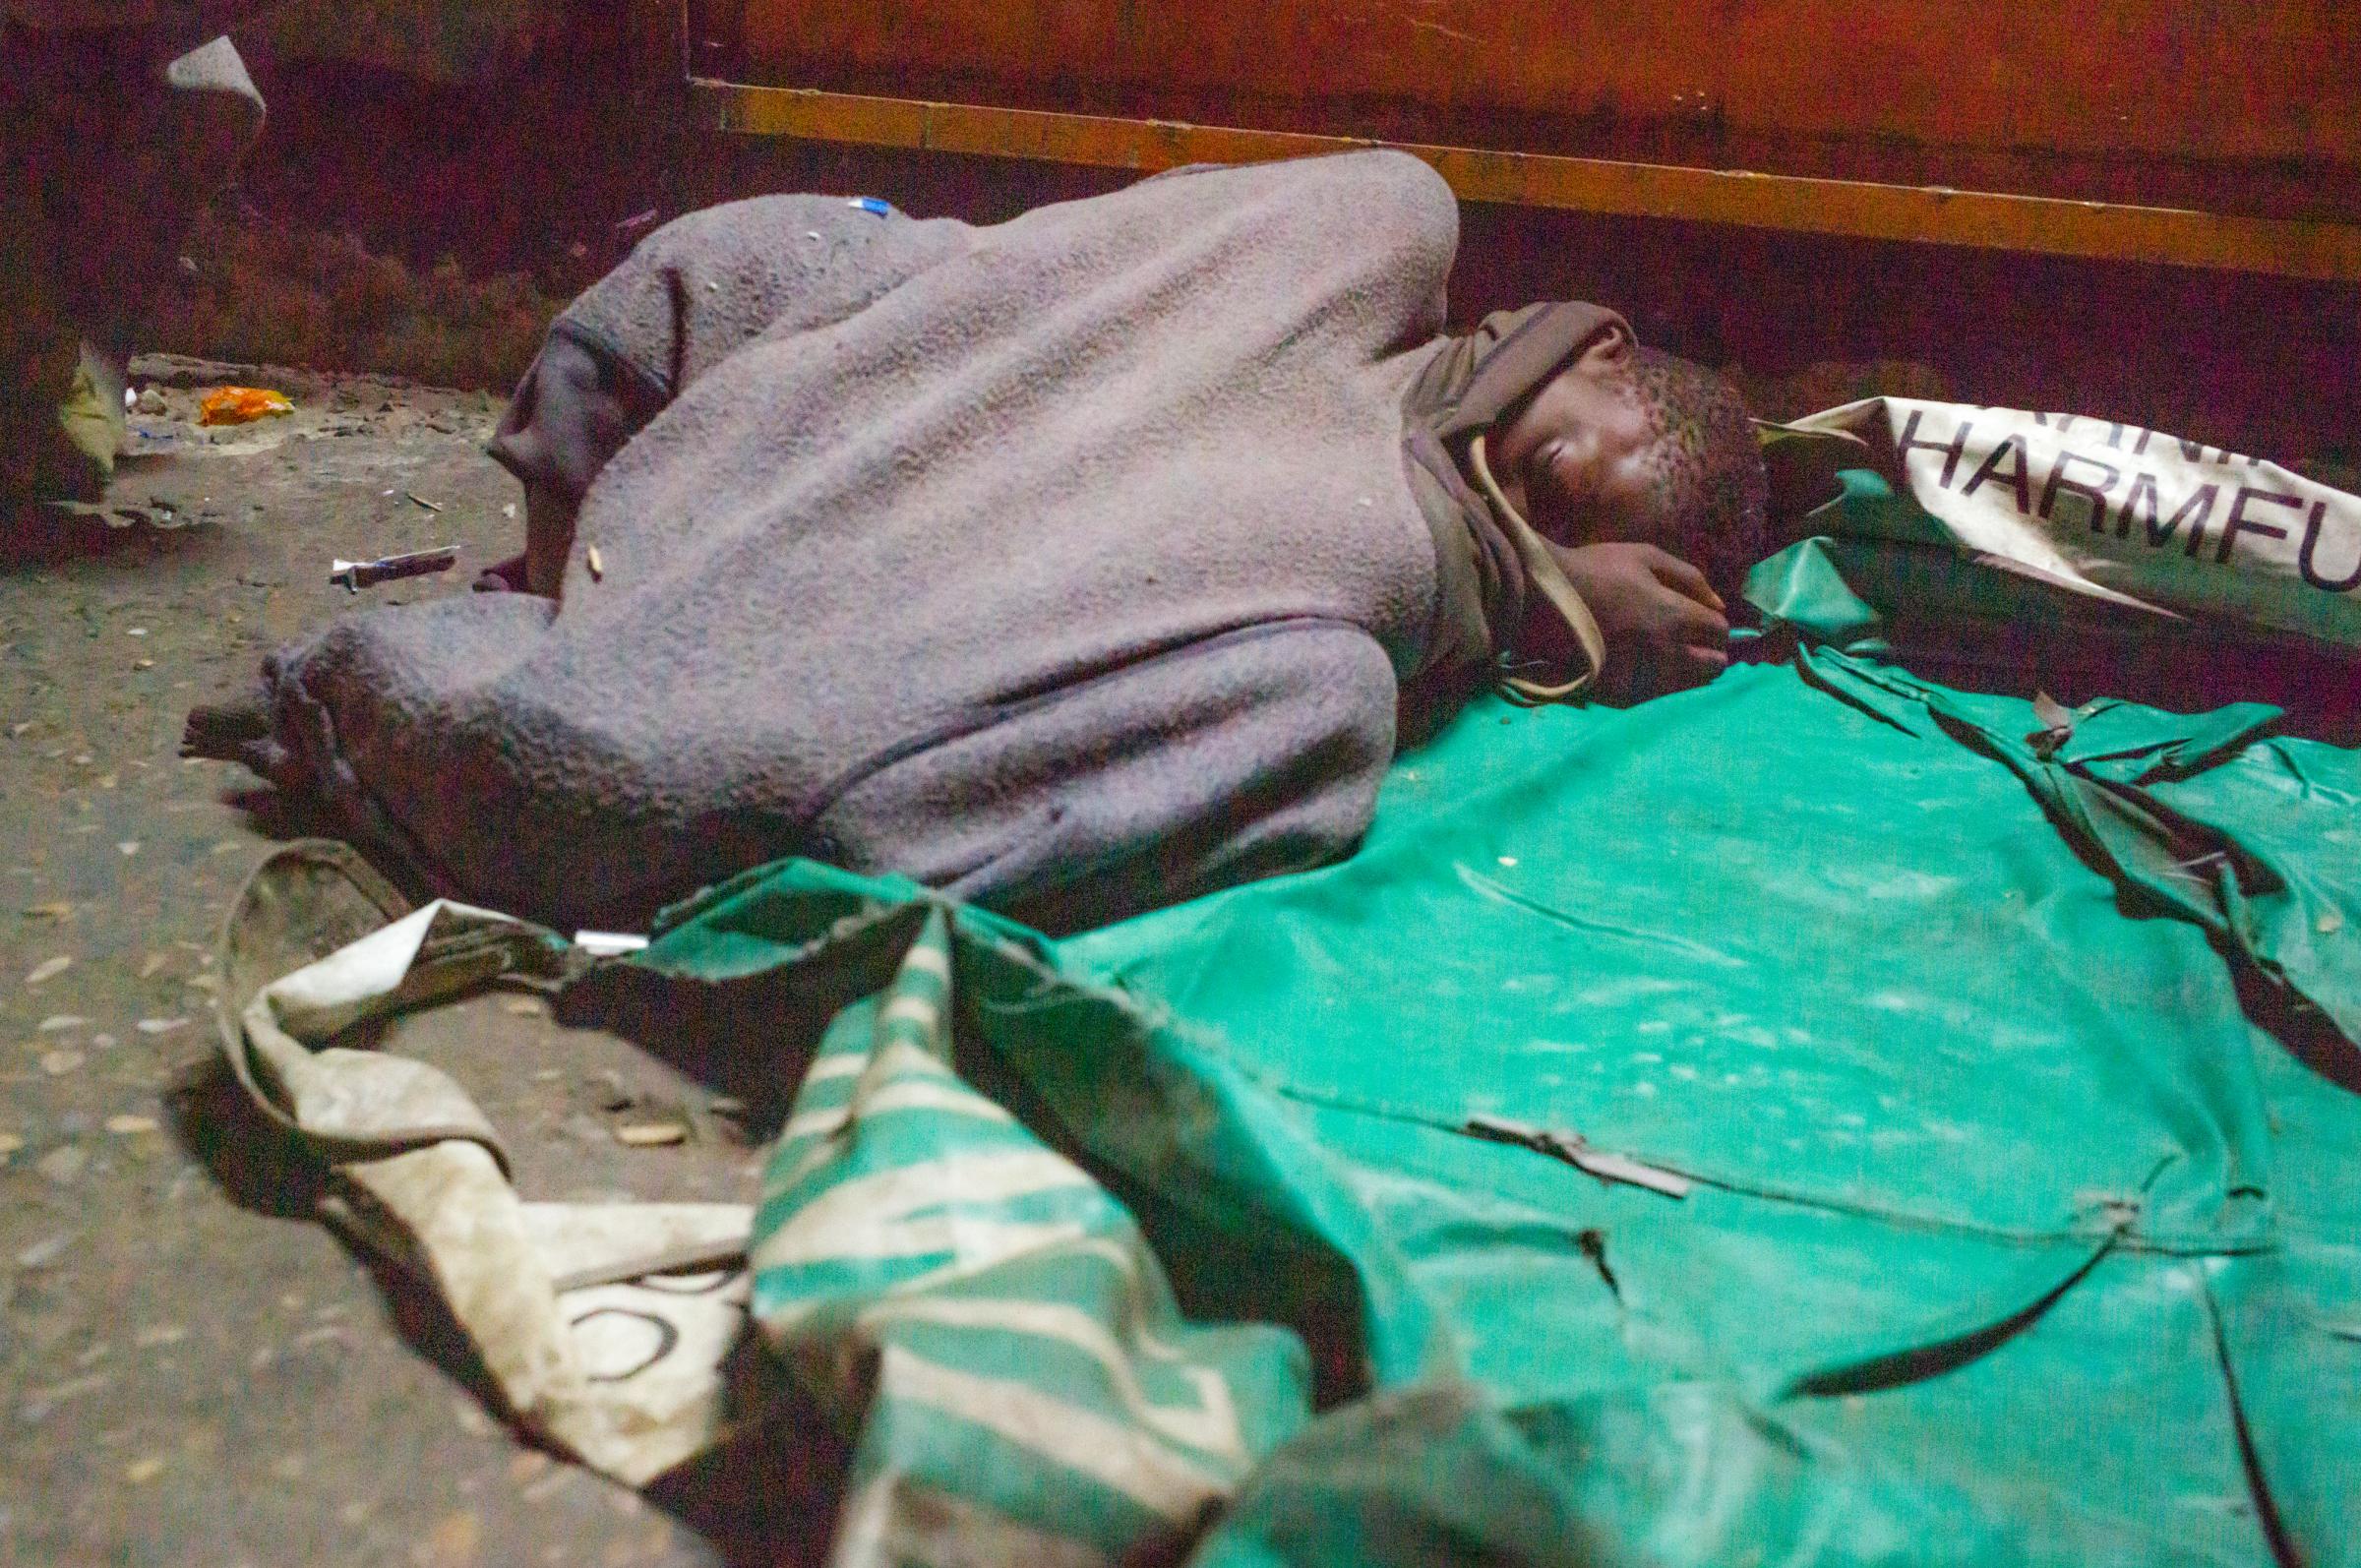 Life on the street in Lusaka - The children sleep huddled together under blankets or cardboard or whatever they can find. It...